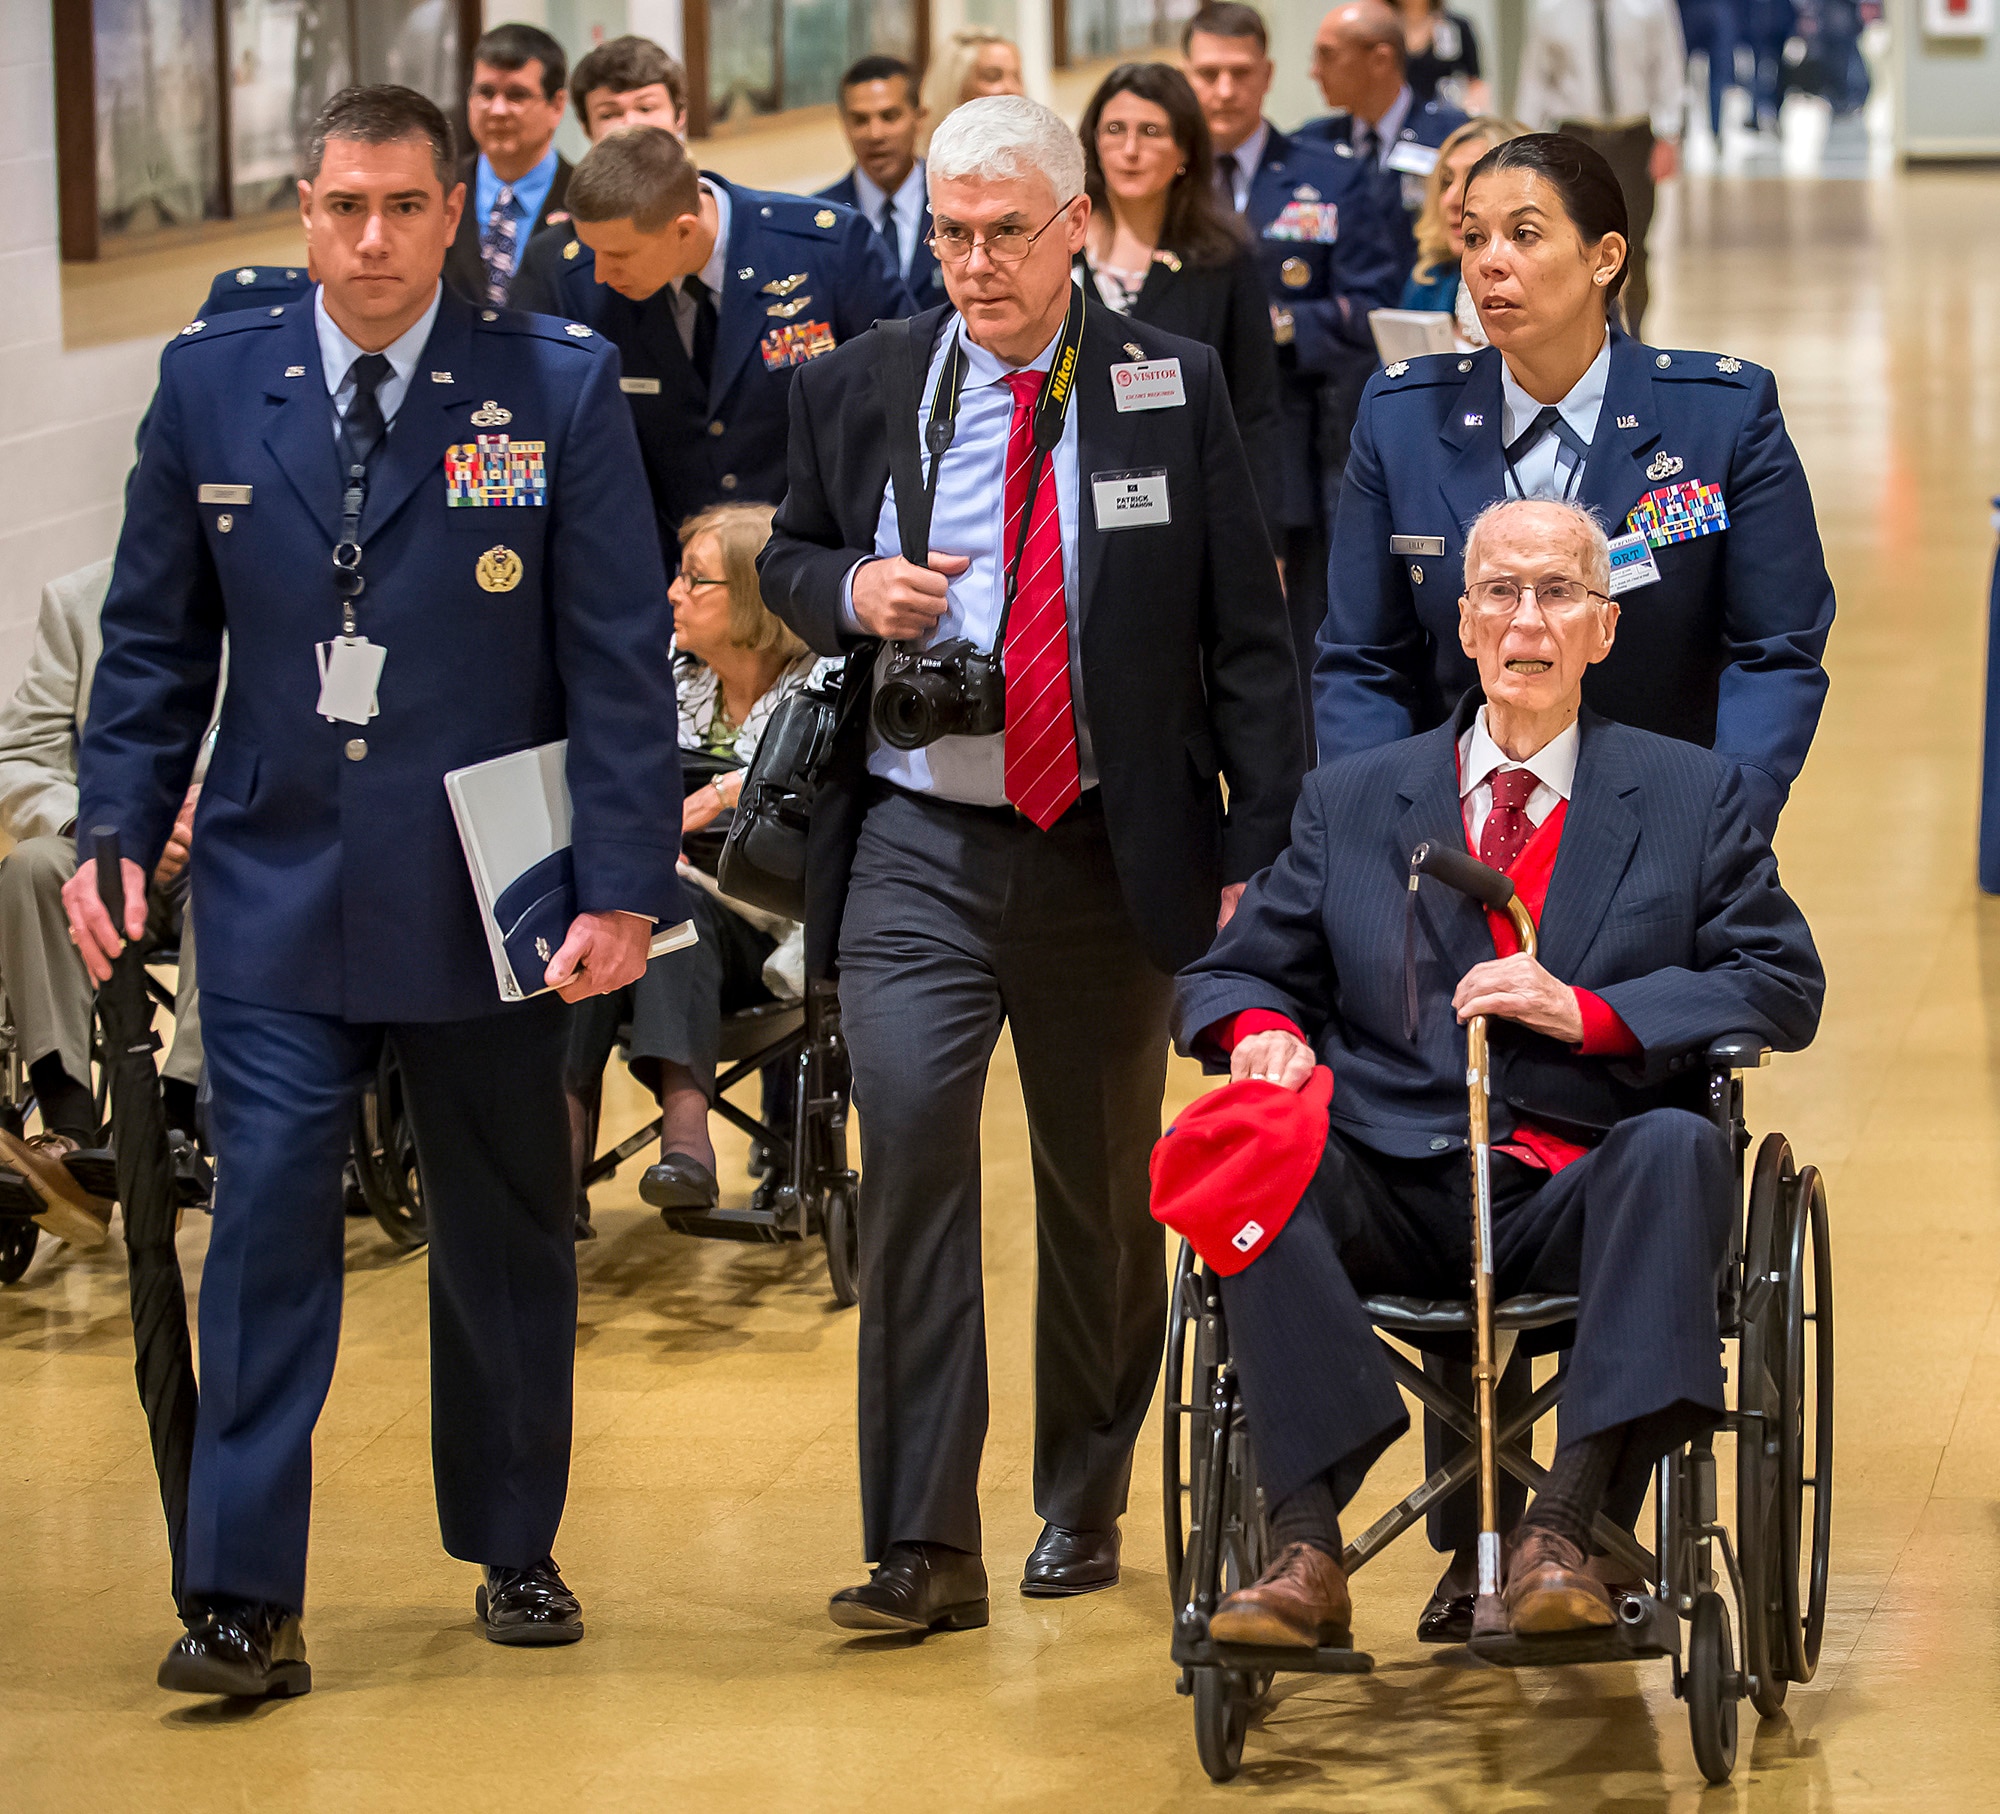 First Lt. James Mahon (seated) is escorted into the Pentagon where he received the Prisoner of War Medal from Air Force Chief of Staff Gen. Mark A. Welsh III during a ceremony April 30, 2014. Nine aviators were shot down while flying missions over Germany and held in a prison camp in Wauwilermoos, Switzerland. (U.S. Air Force photo/Jim Varhegyi)